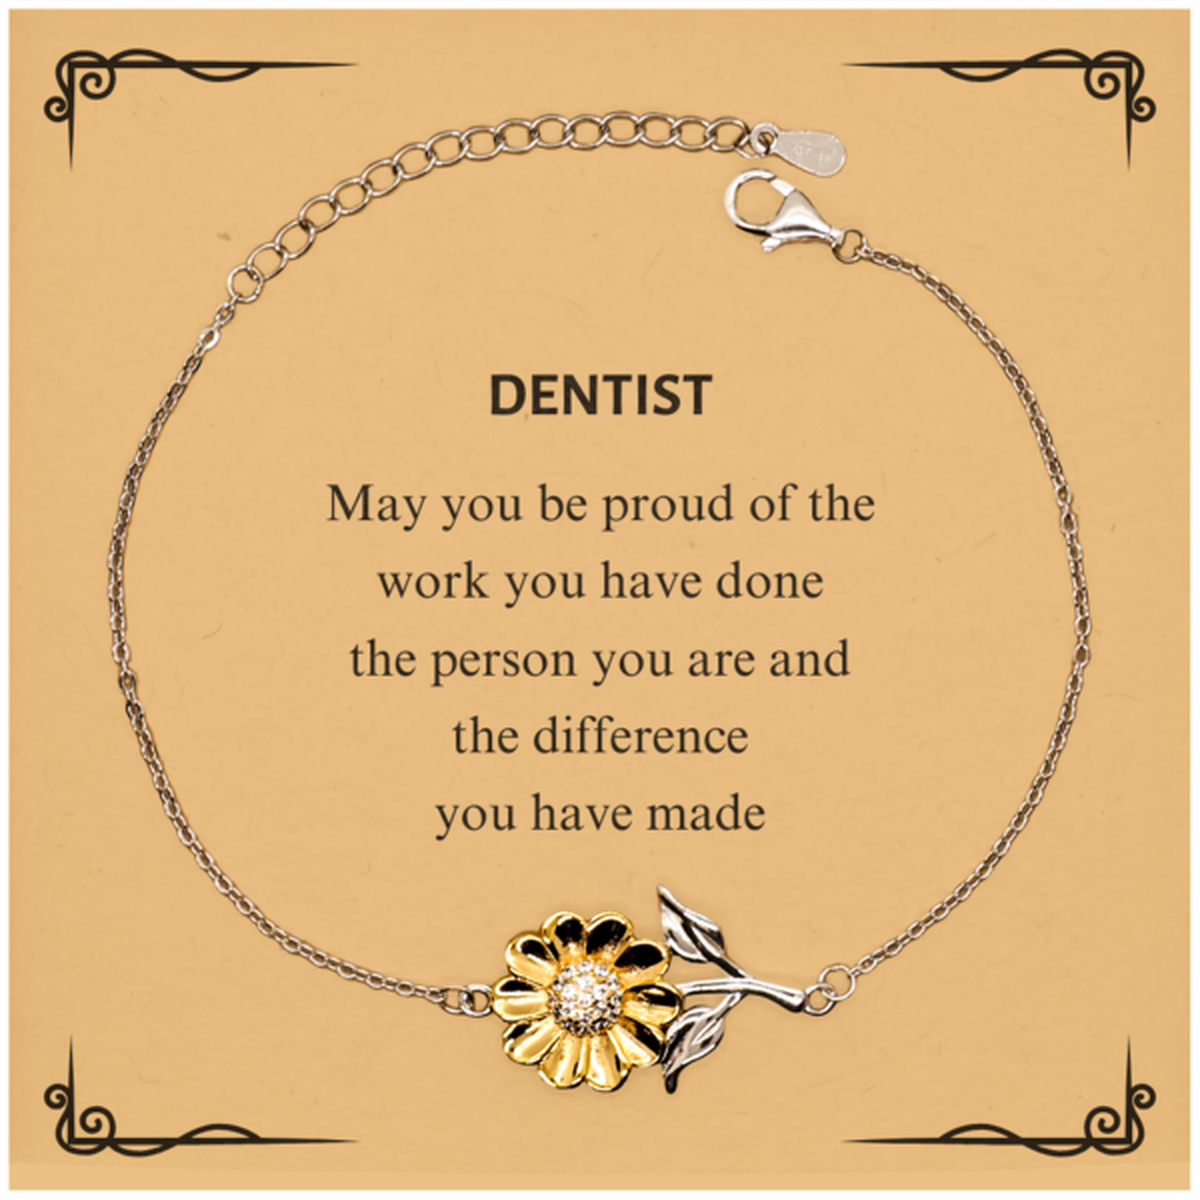 Dentist May you be proud of the work you have done, Retirement Dentist Sunflower Bracelet for Colleague Appreciation Gifts Amazing for Dentist